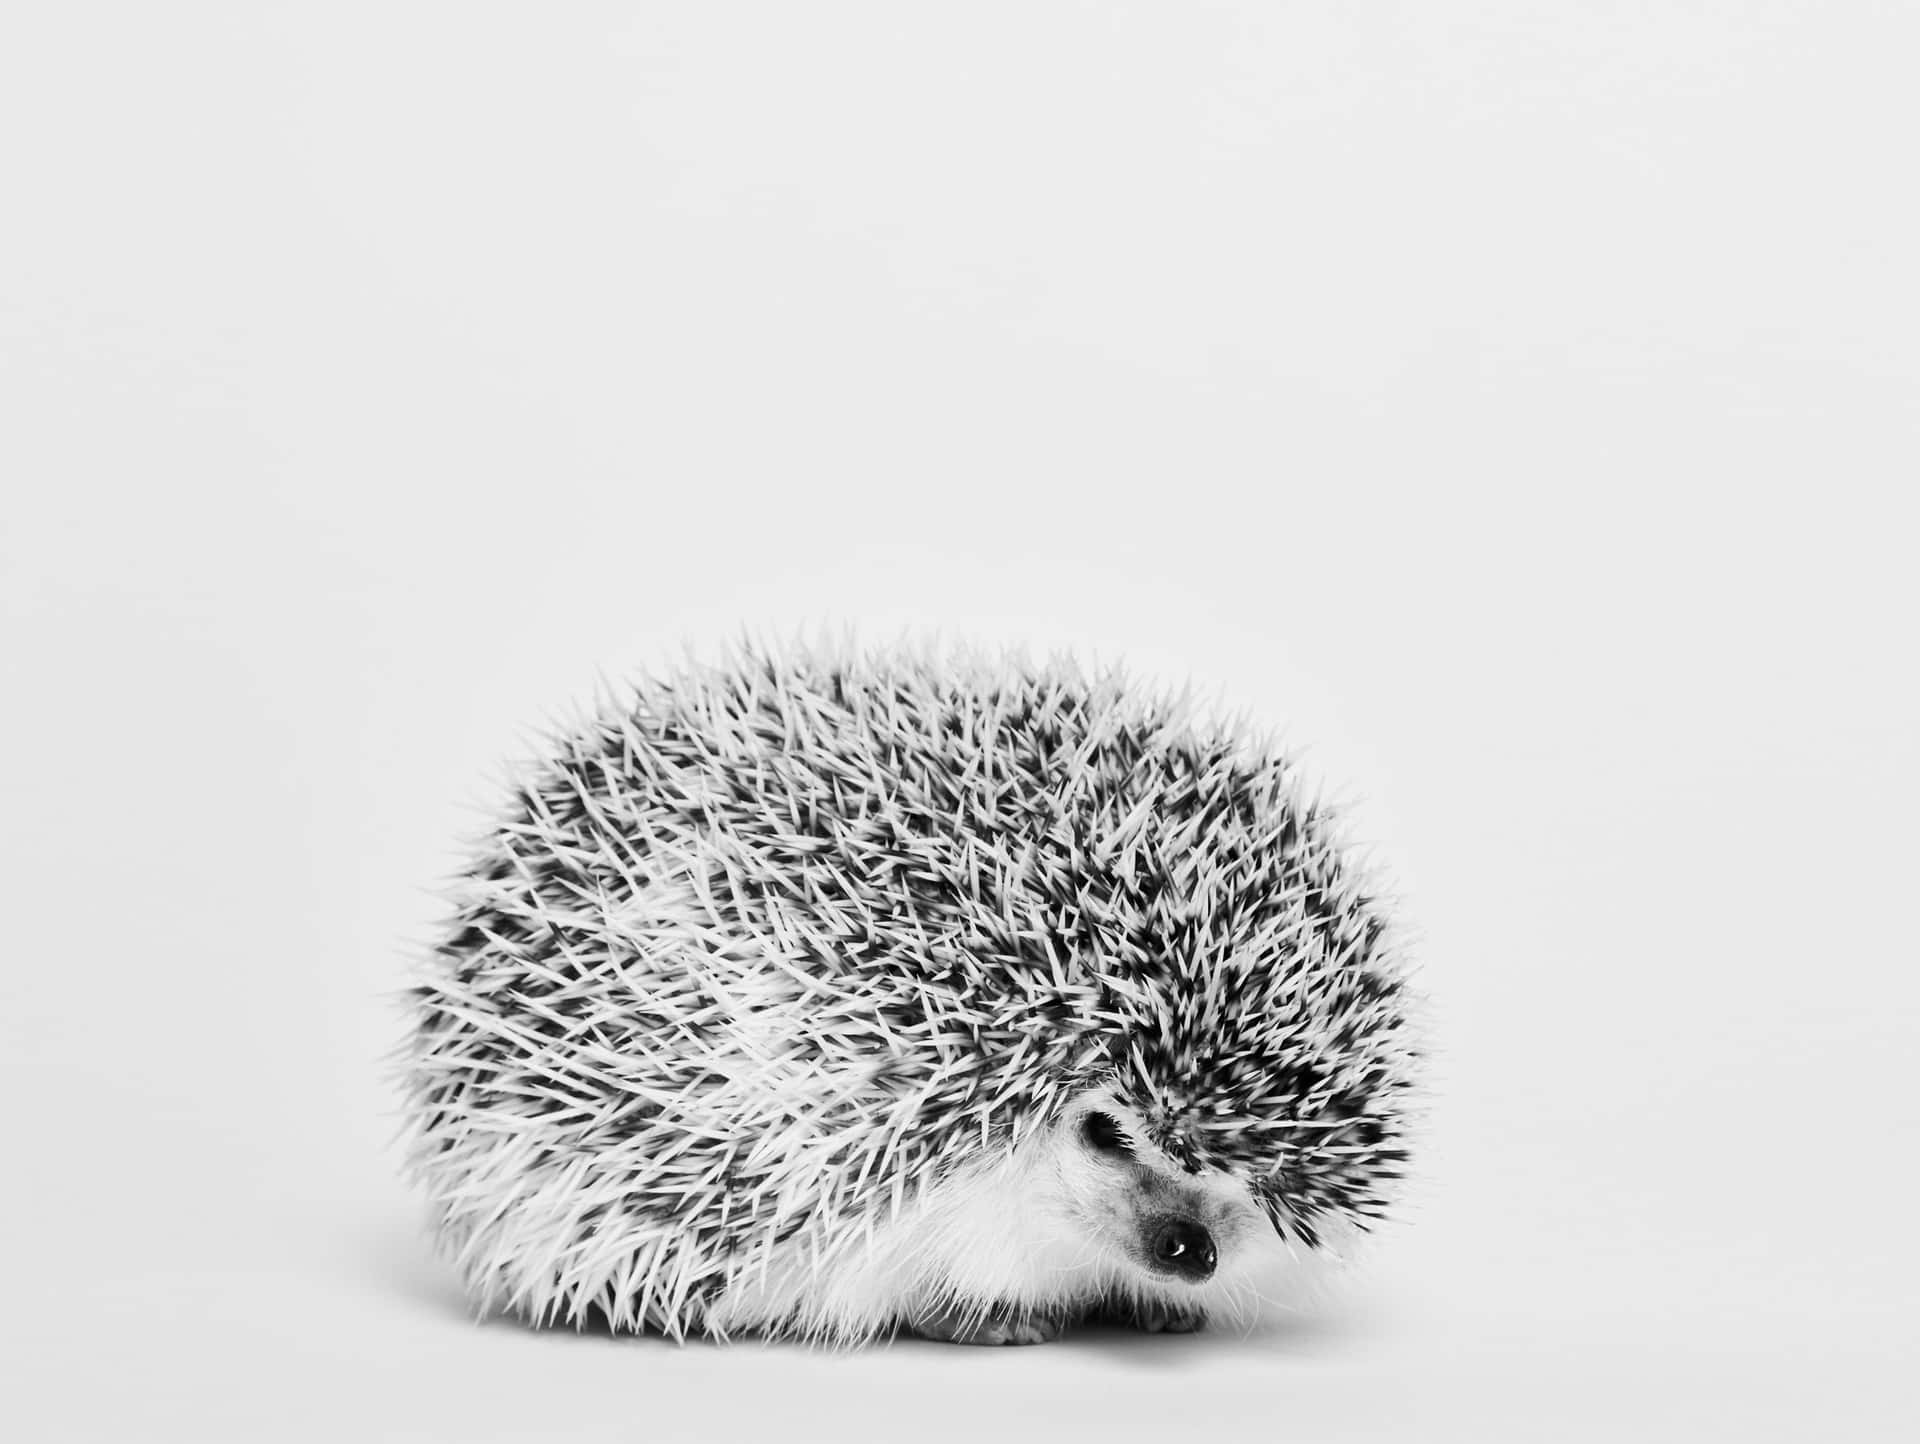 Cute Hedgehog Black And White Photography Picture